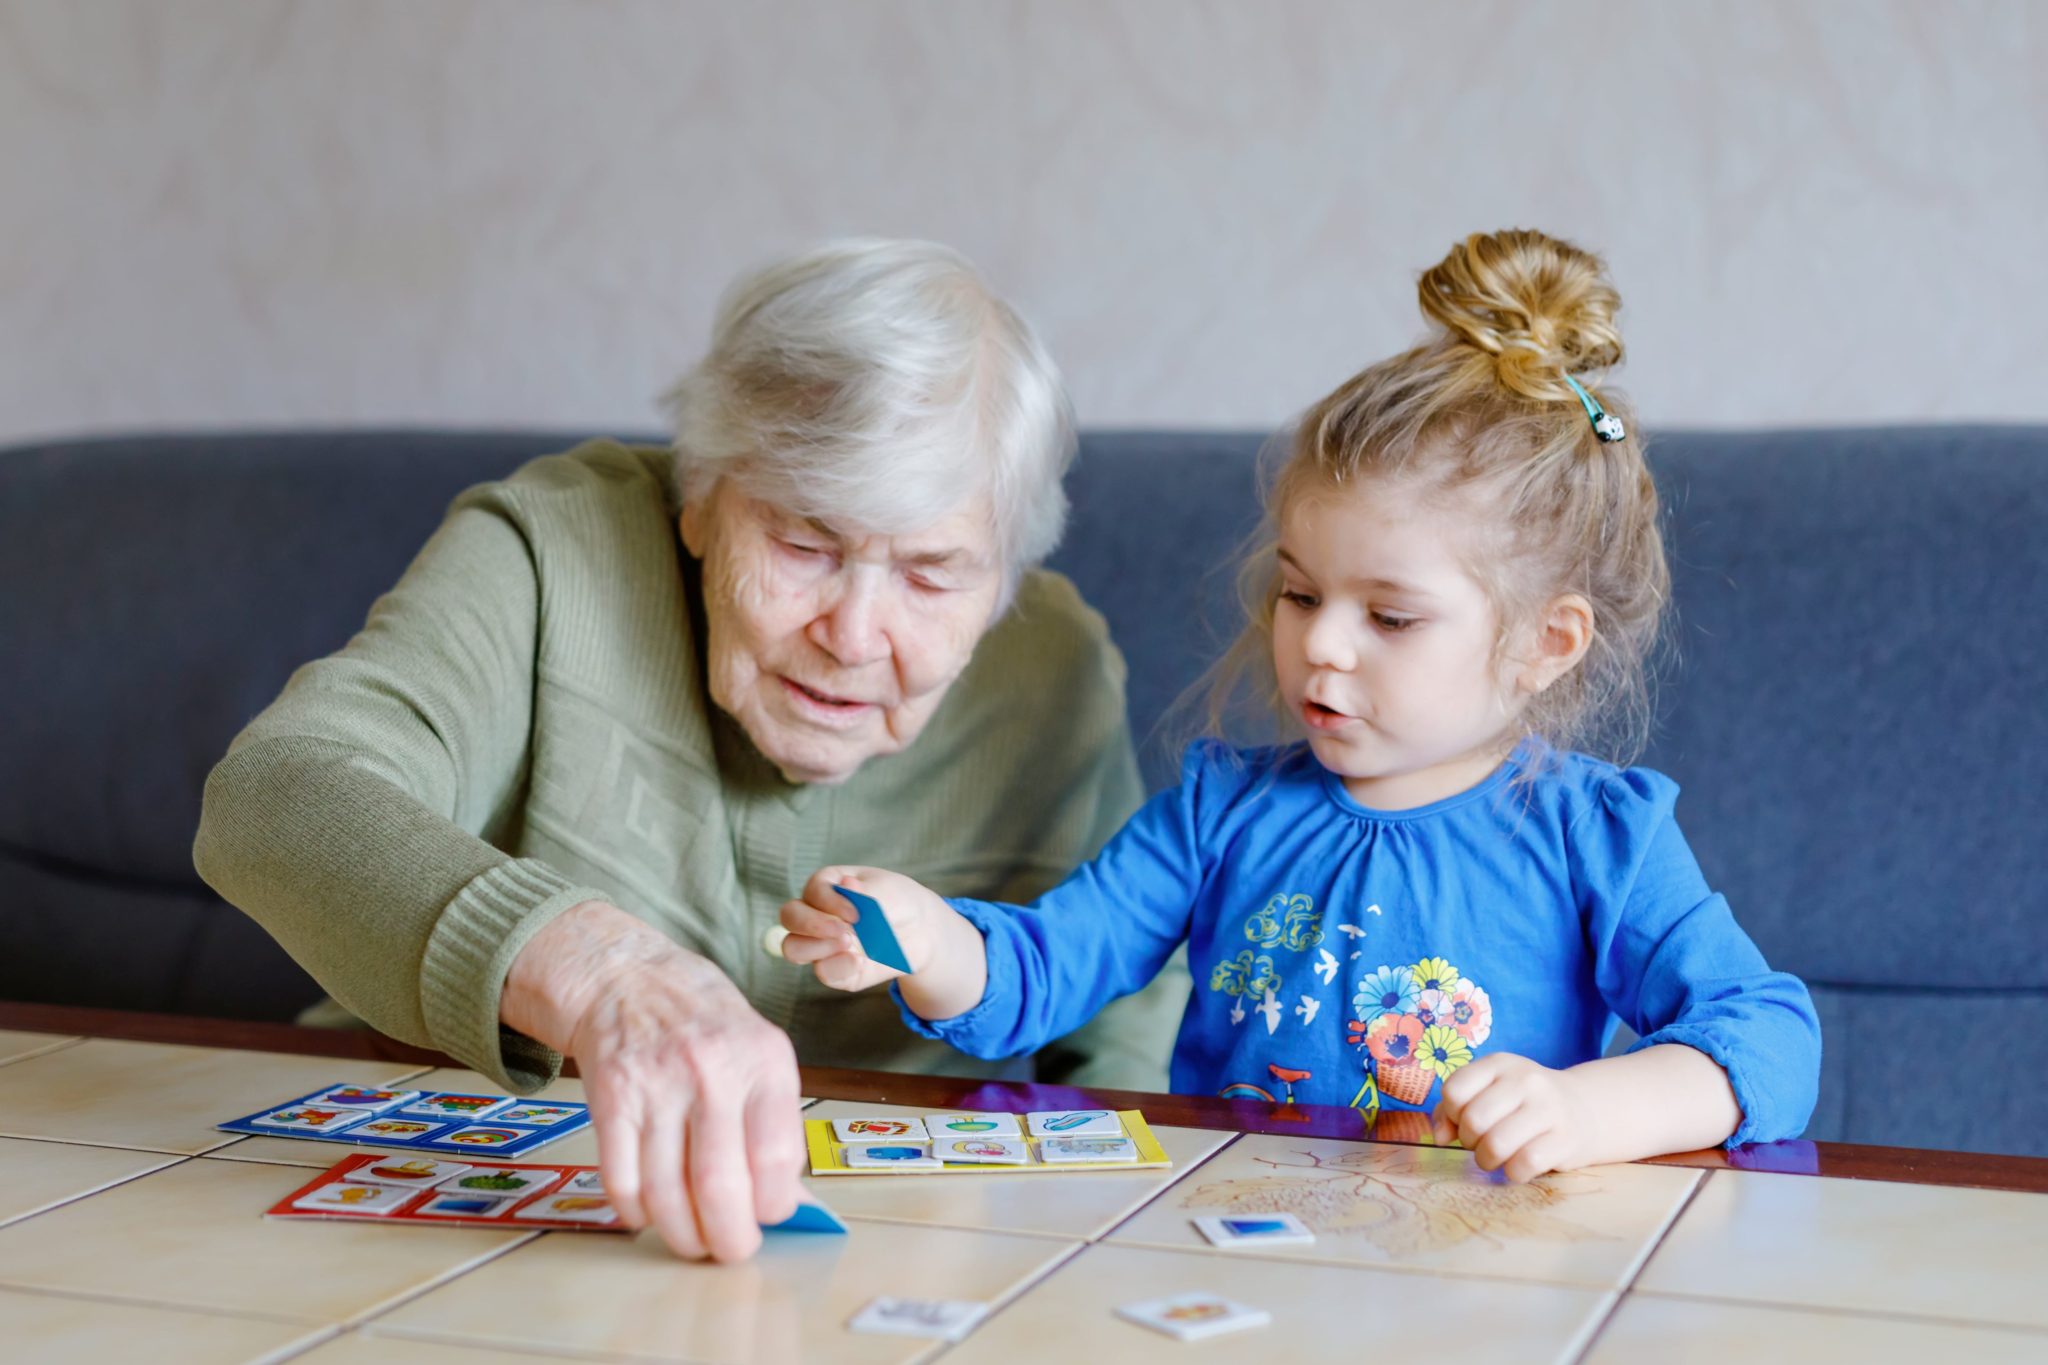 Senior woman with memory difficulties playing with grandchild.